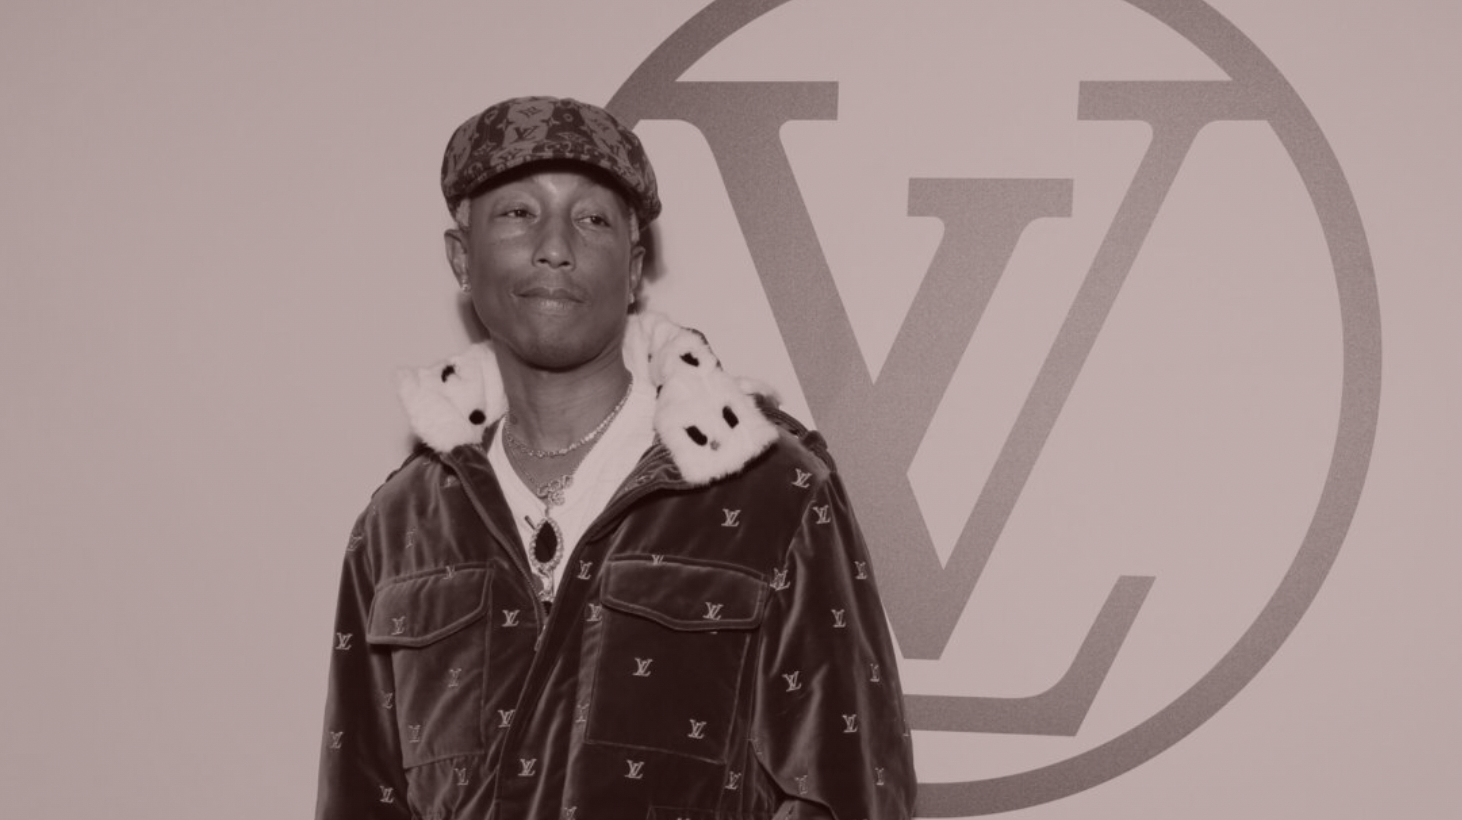 Pharrell Williams on his Louis Vuitton debut: 'This is not a gig. This is a  dream